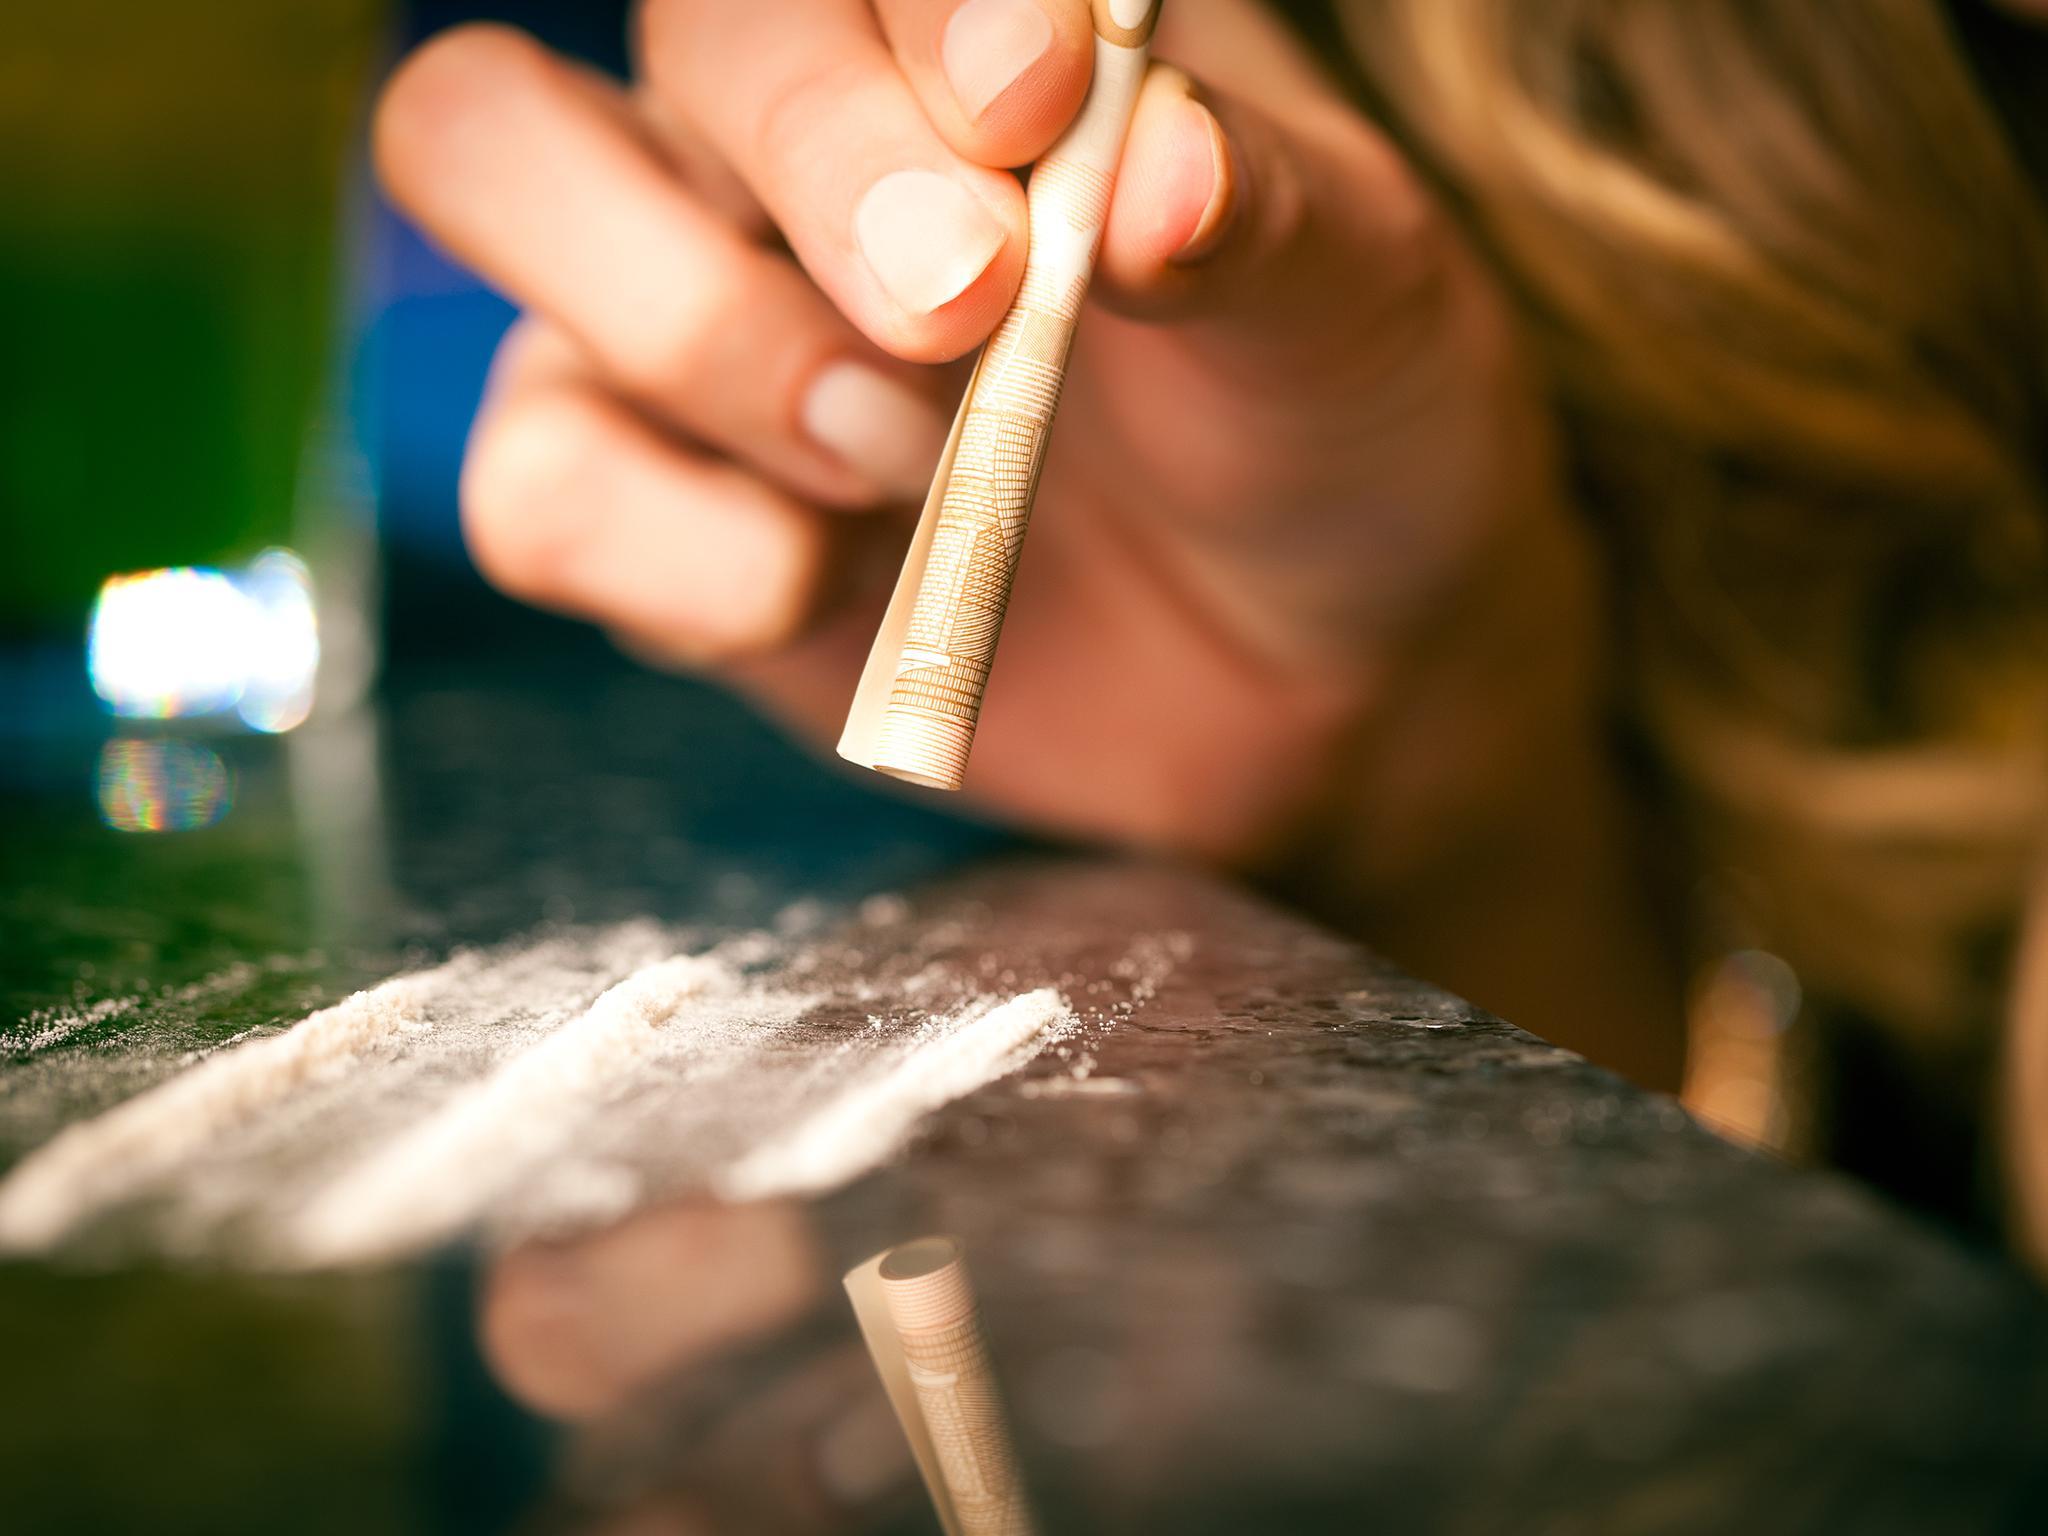 Drug abuse changes the way women experience sex, study finds The Independent The Independent picture picture